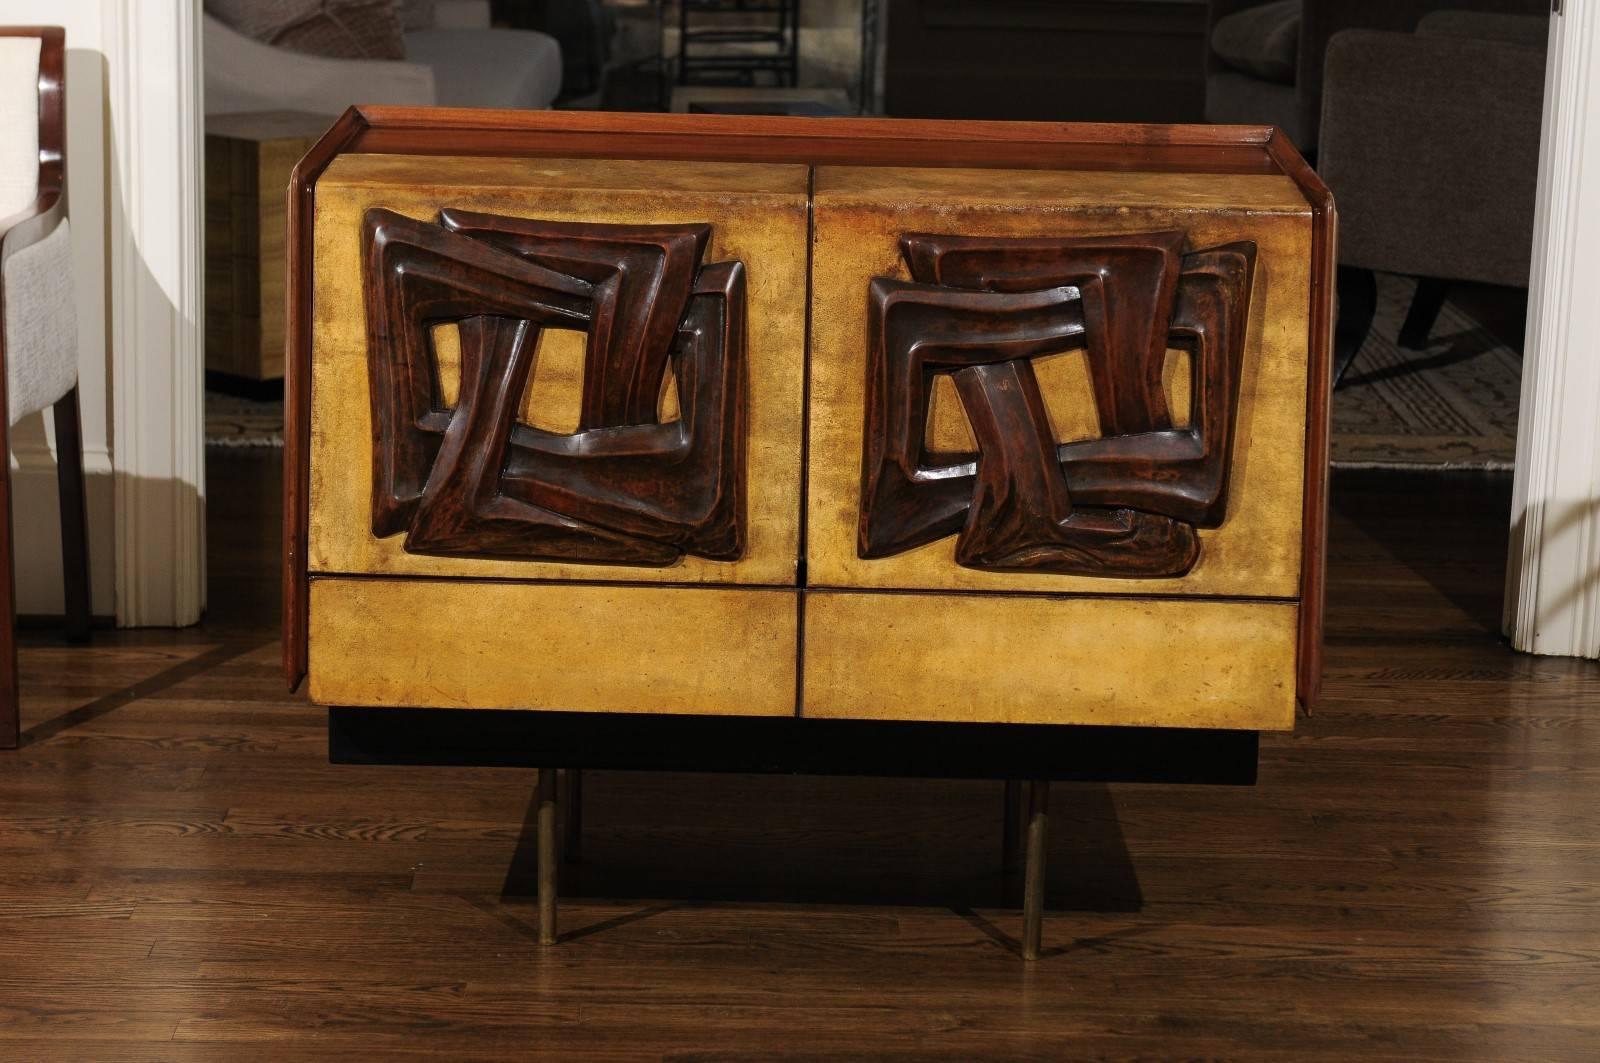 A stunning bar cabinet attributed to Claude Vassal, France, circa 1950. Striking wedge shaped rosewood case with drop-front doors clad in goatskin. Magnificent hand-carved Walnut motifs adorn the doors. The cabinet is mounted atop simple solid brass